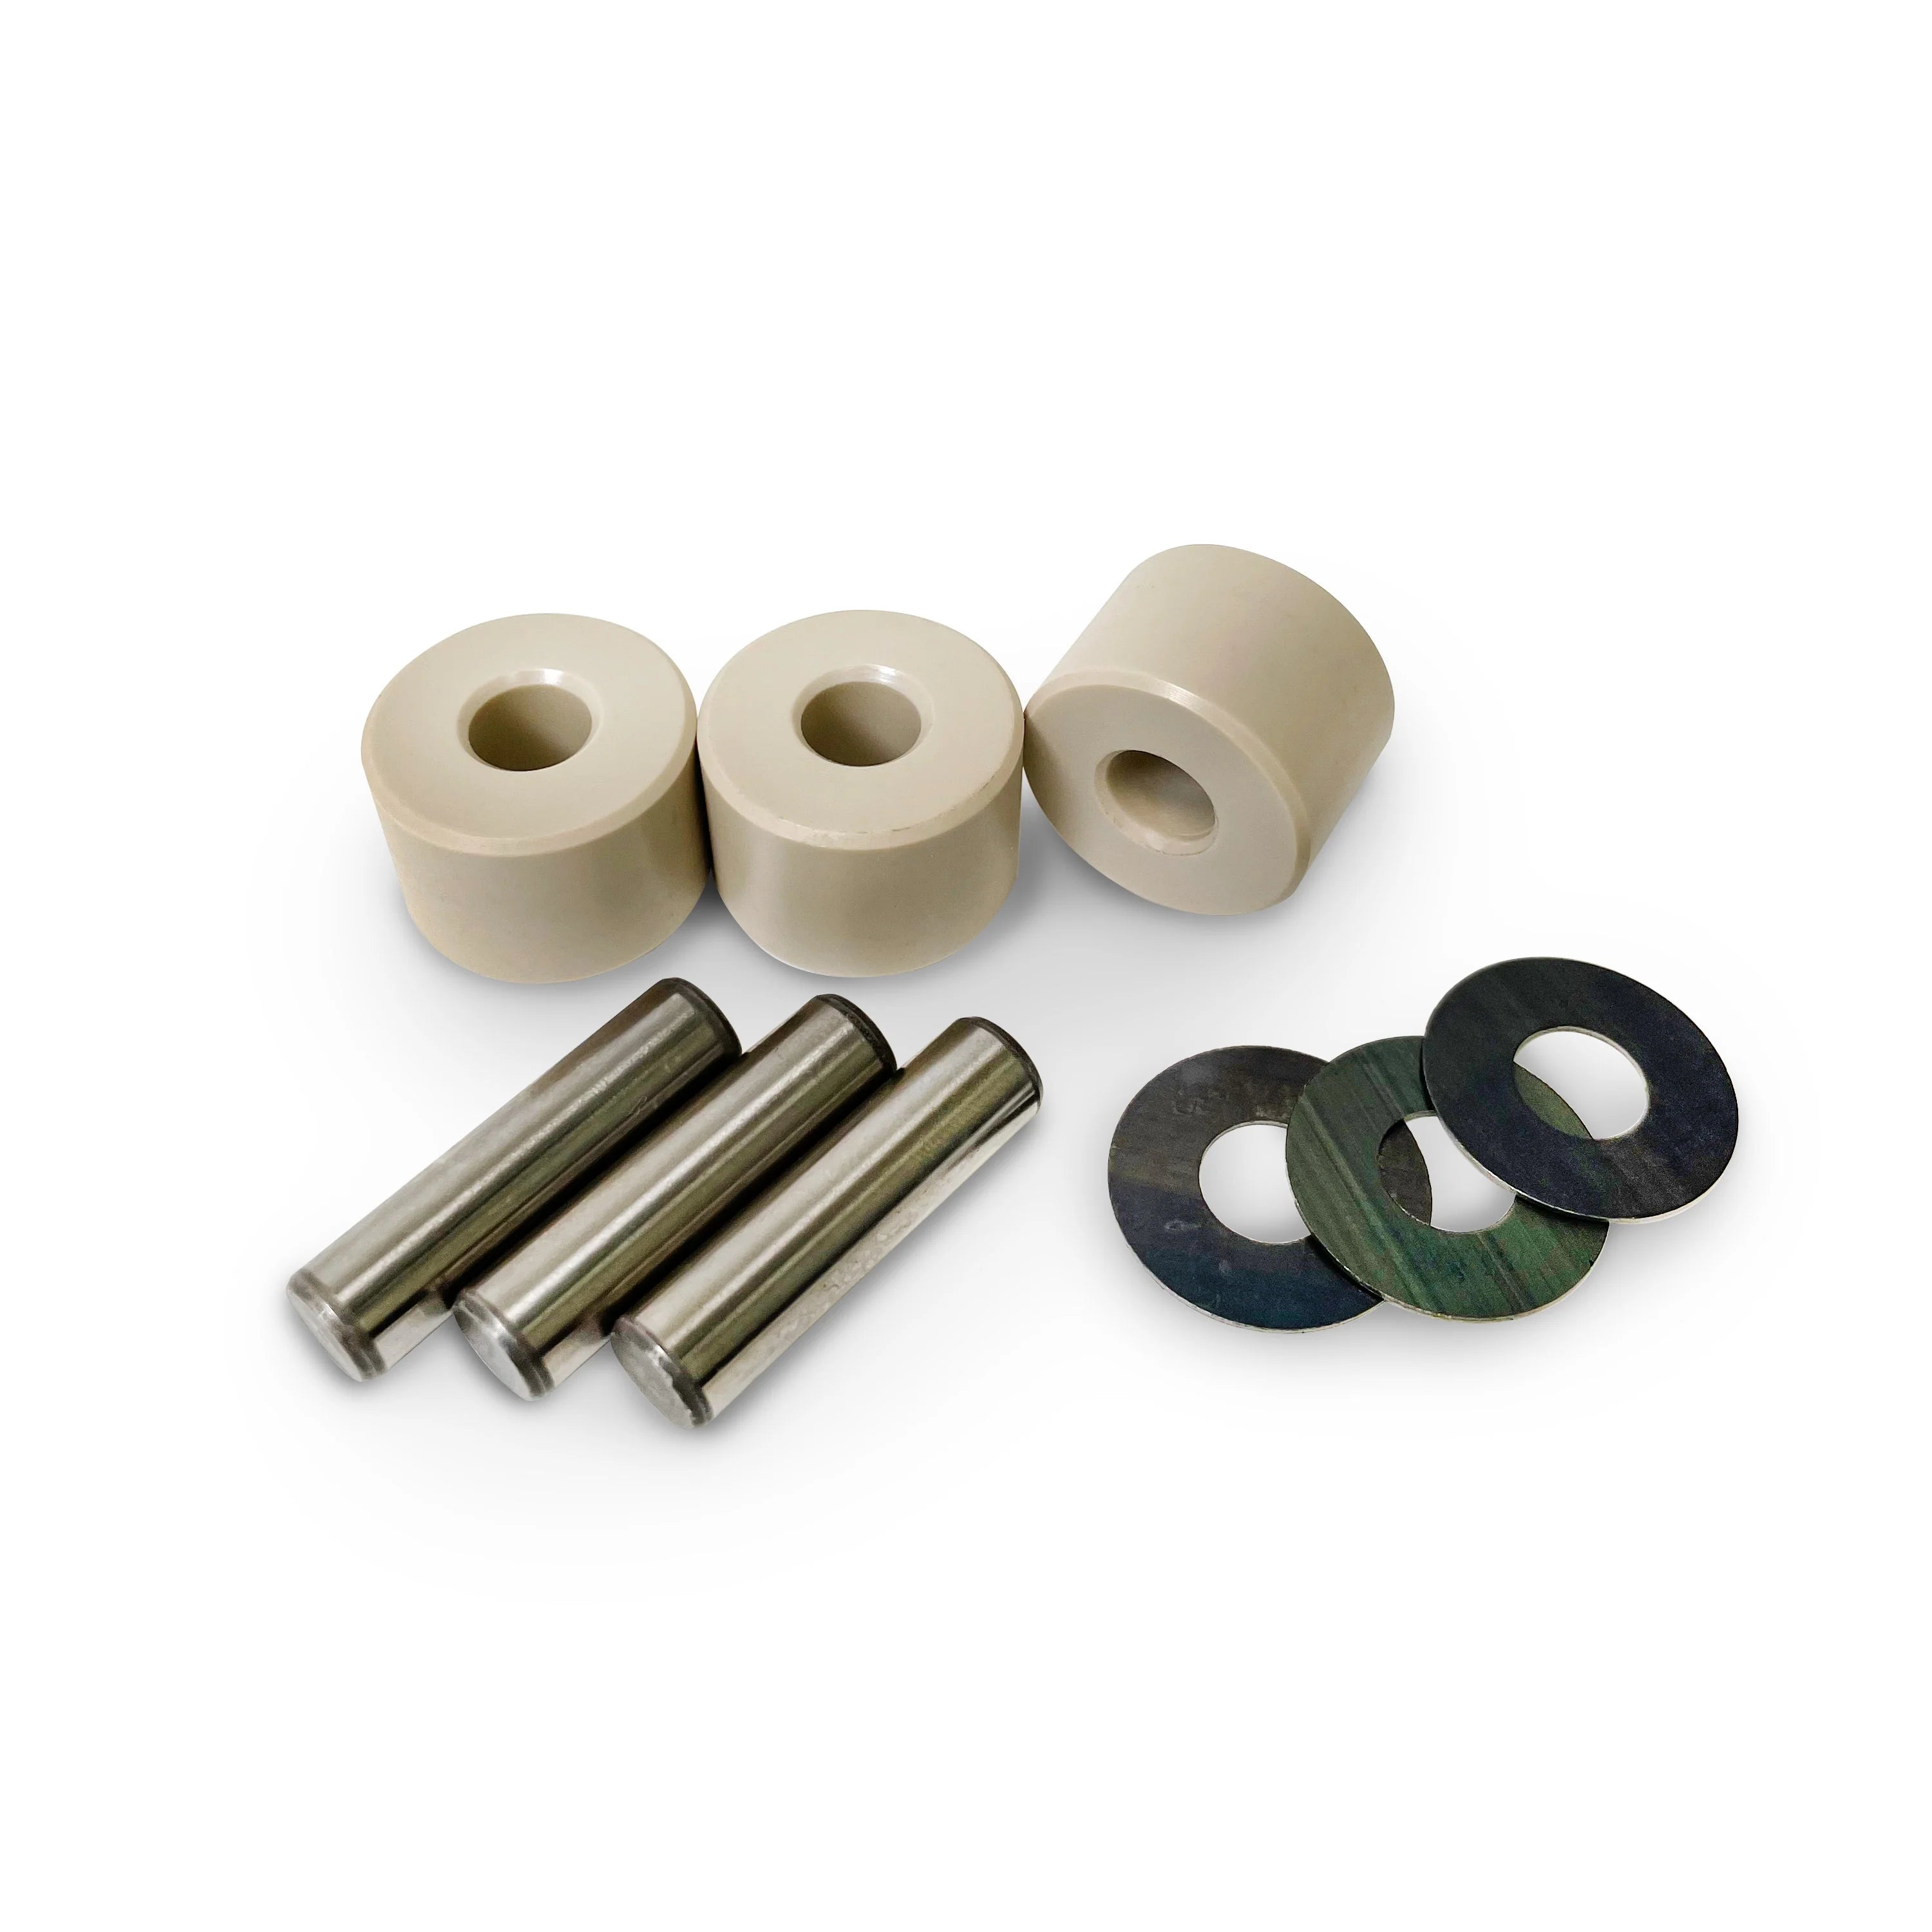 X3 Badass Secondary Clutch Rollers with Pin and Washer Kit